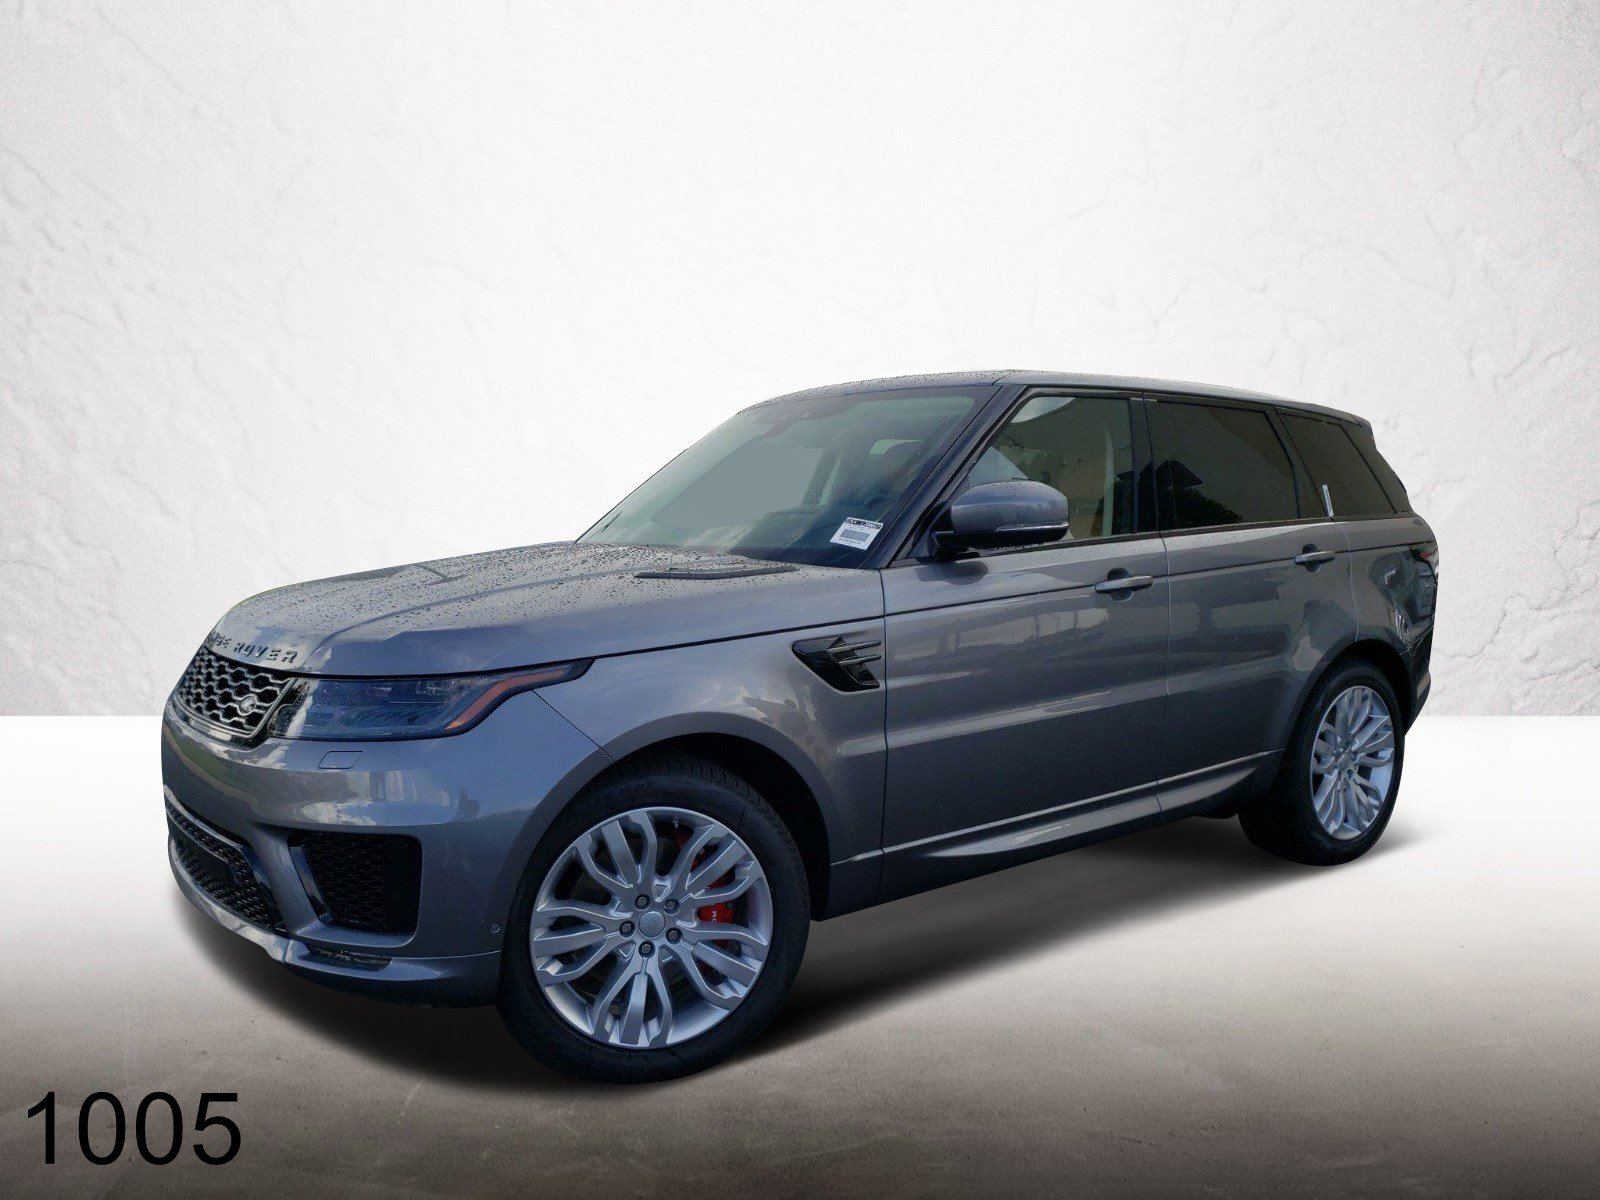 New 2020 Land Rover Range Rover Sport Hse Dynamic